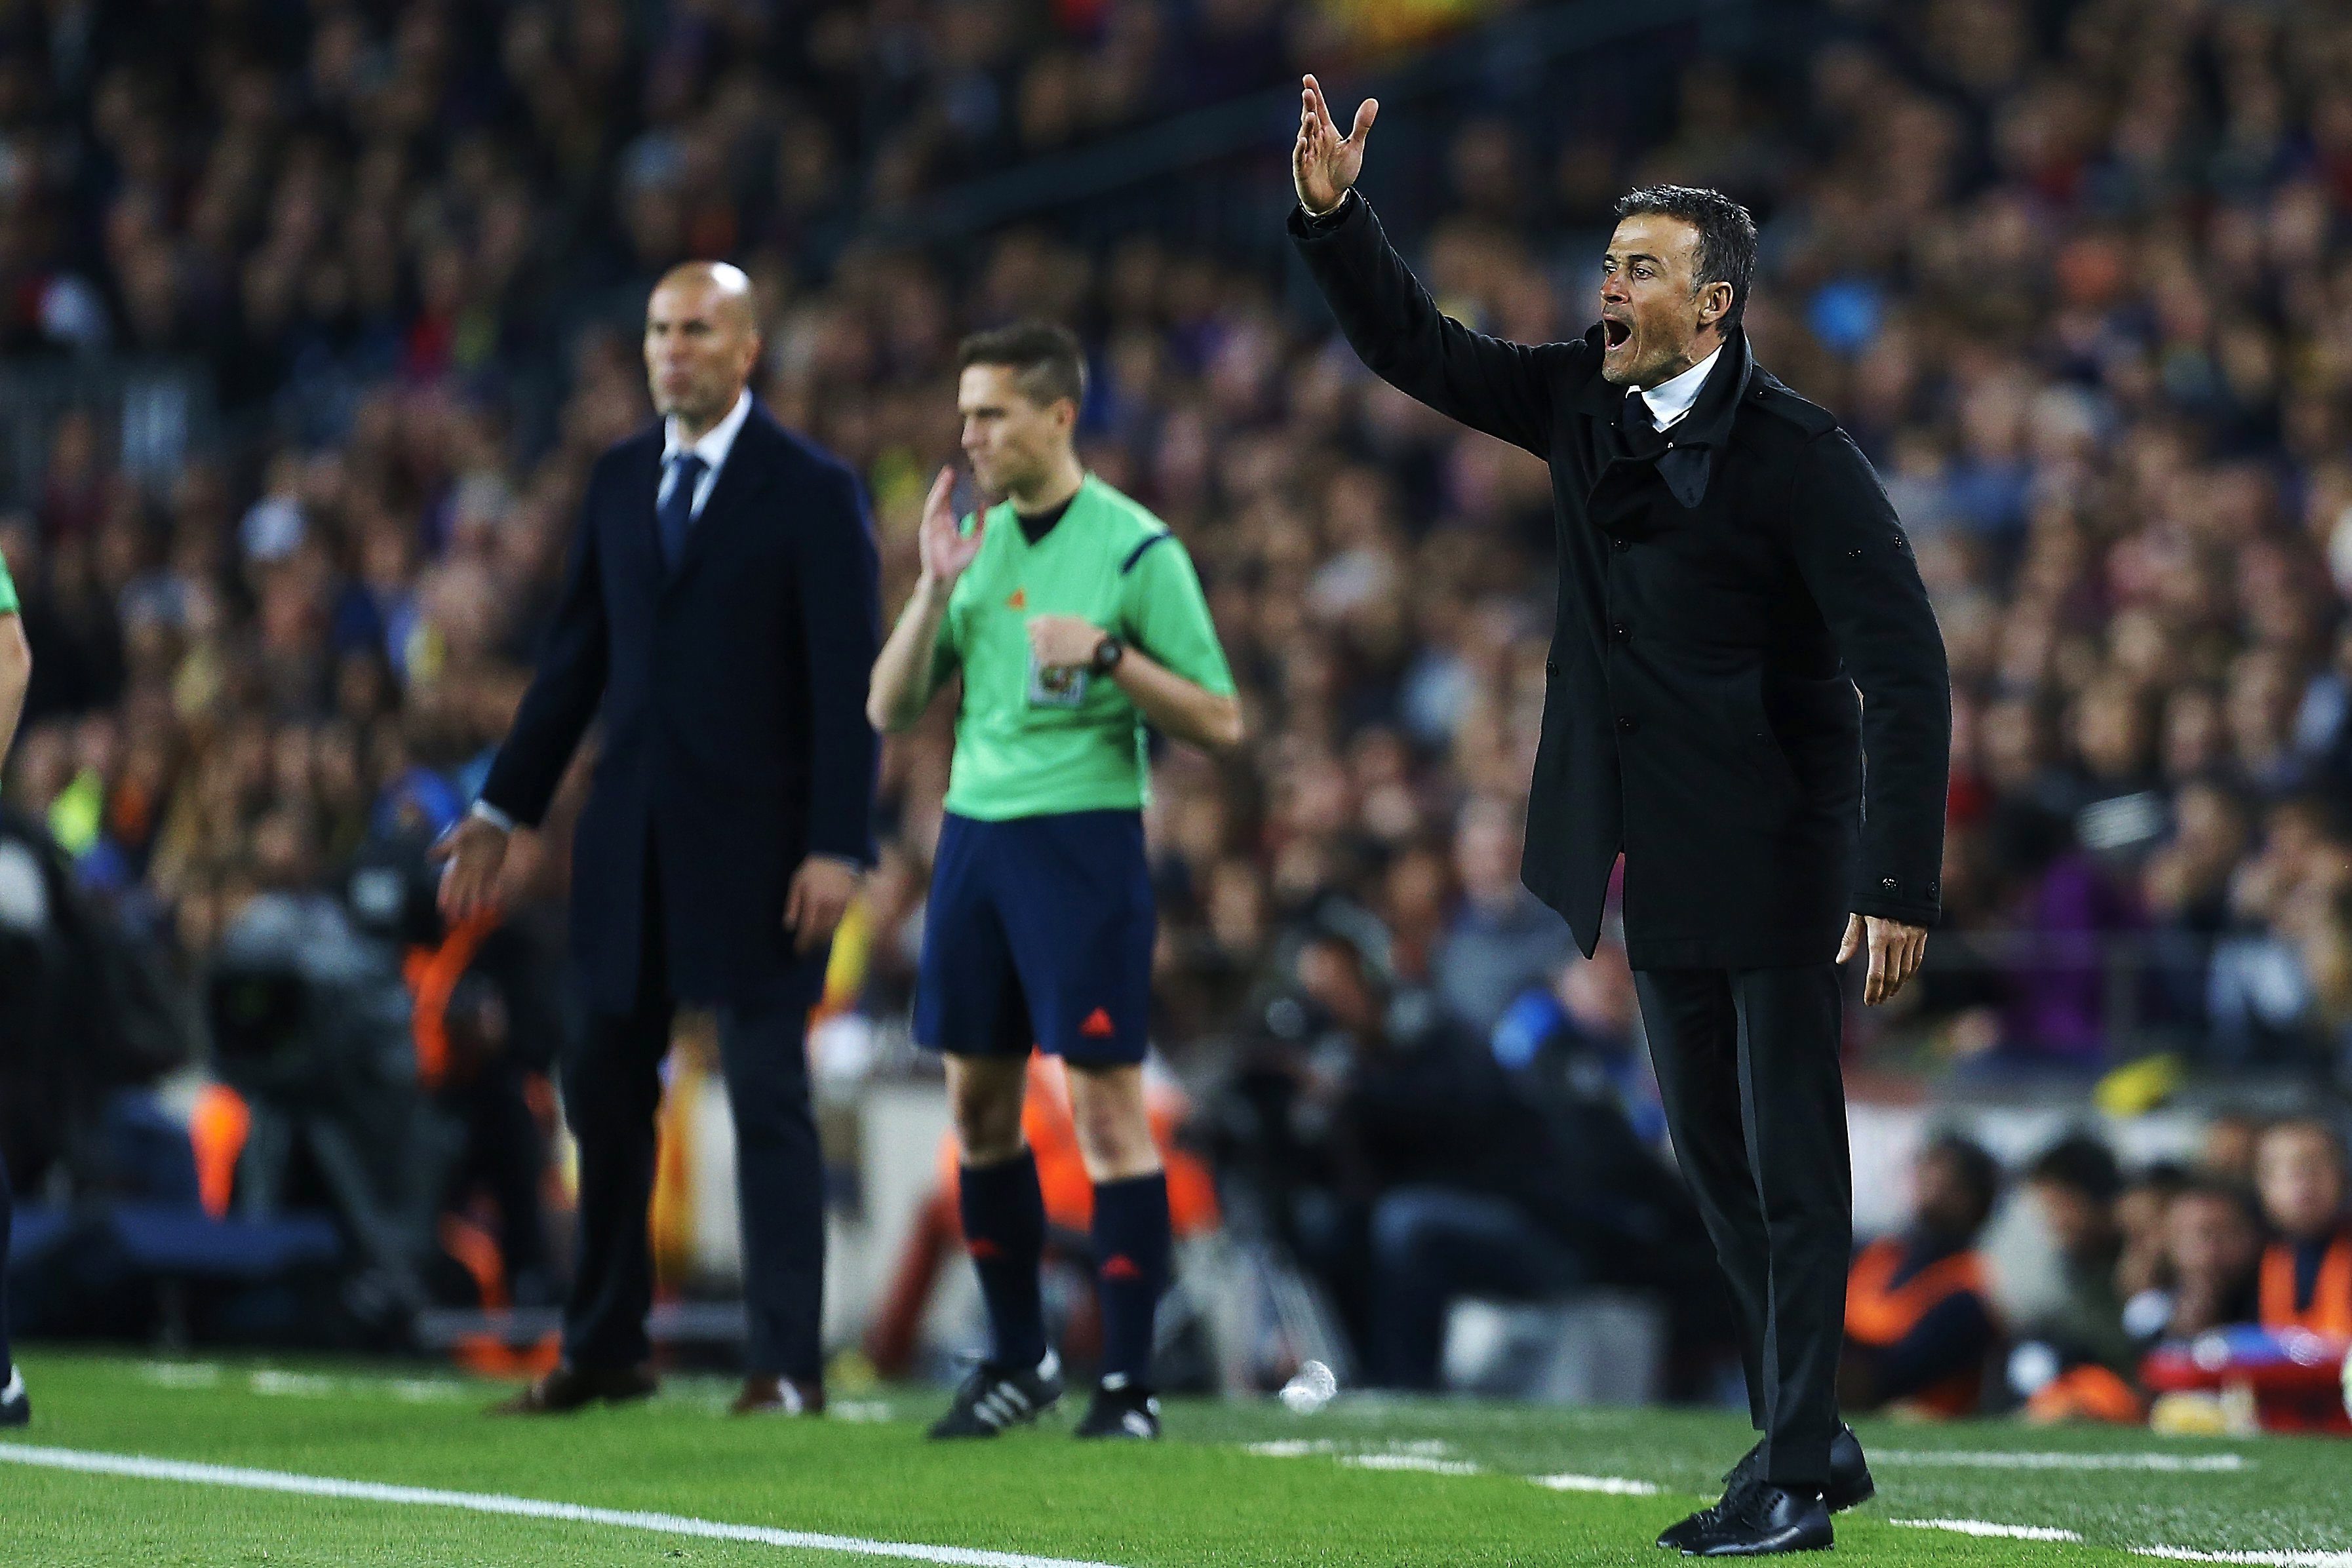 epa05241252 FC Barcelona's Spanish coach Luis Enrique (R) and Real Madrid's French Zinedine Zidane (L) during their Spanish Primera Division soccer match at Camp Nou stadium in Barcelona, northeasterm Spain, 02 April 2016.  EPA/Alejandro Garcia